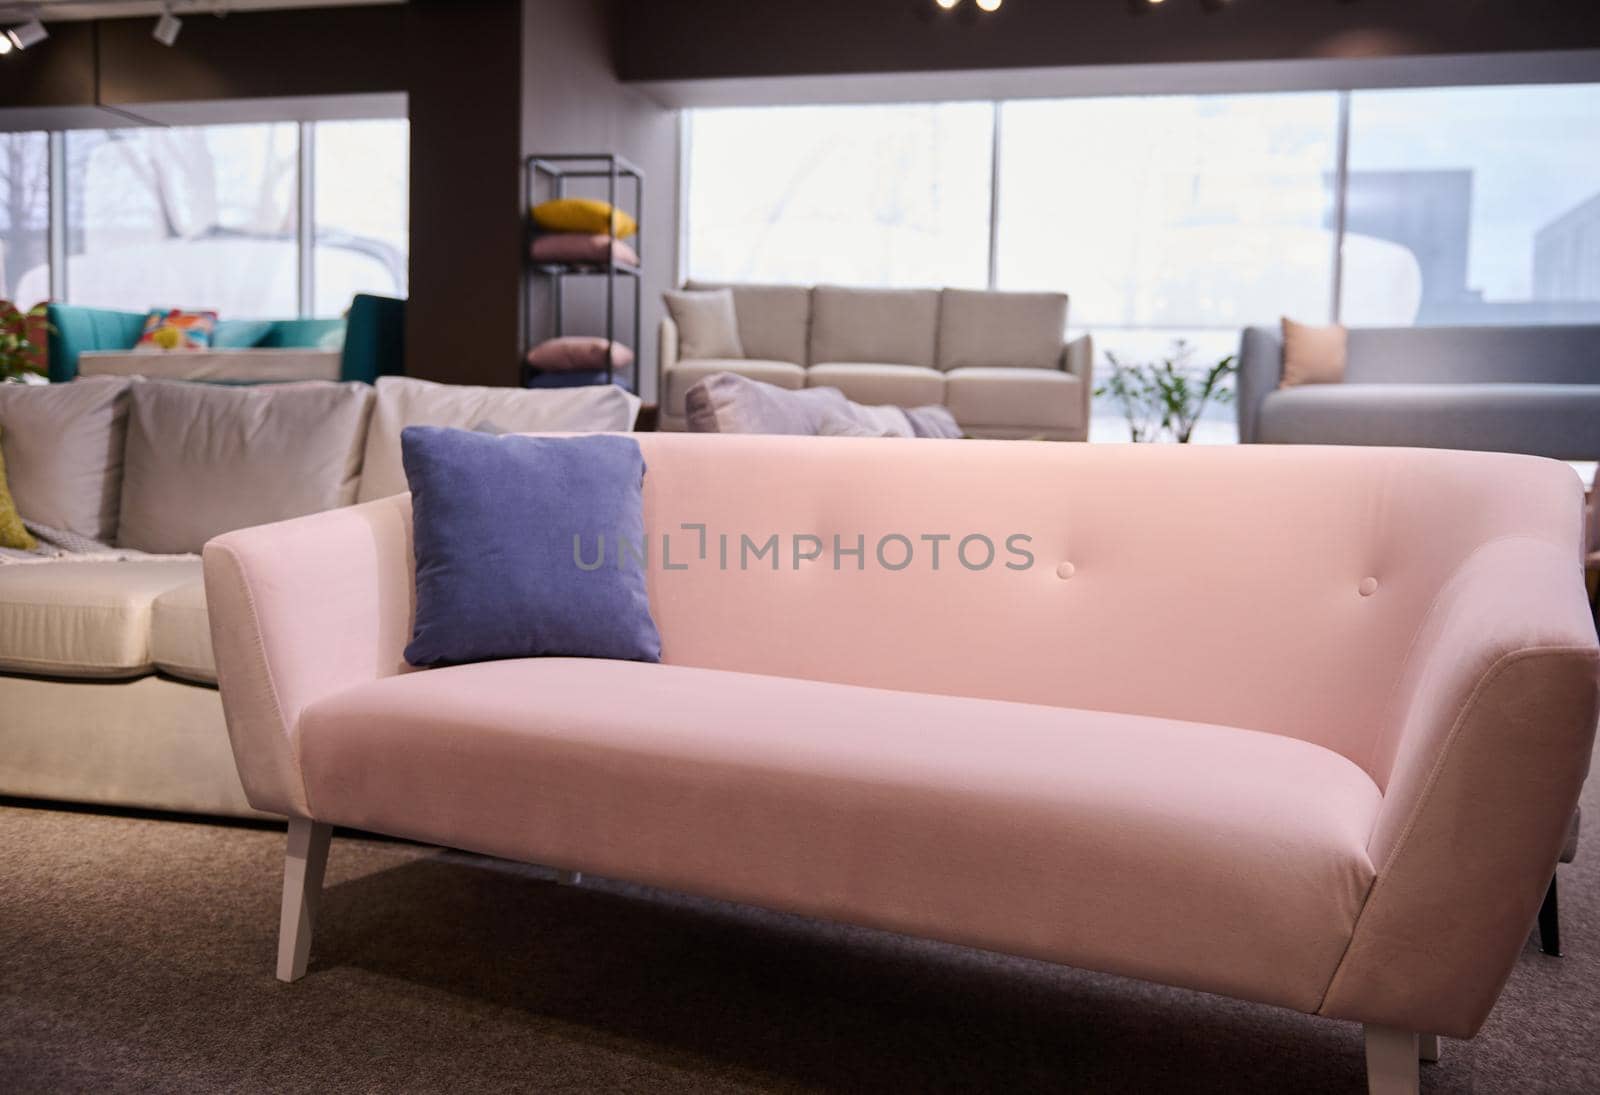 Stylish pink sofa with purple cushion in the showroom of upholstered furniture. Furniture store with sofas and couches on display for sale, copy space. Furniture store showroom interior. by artgf